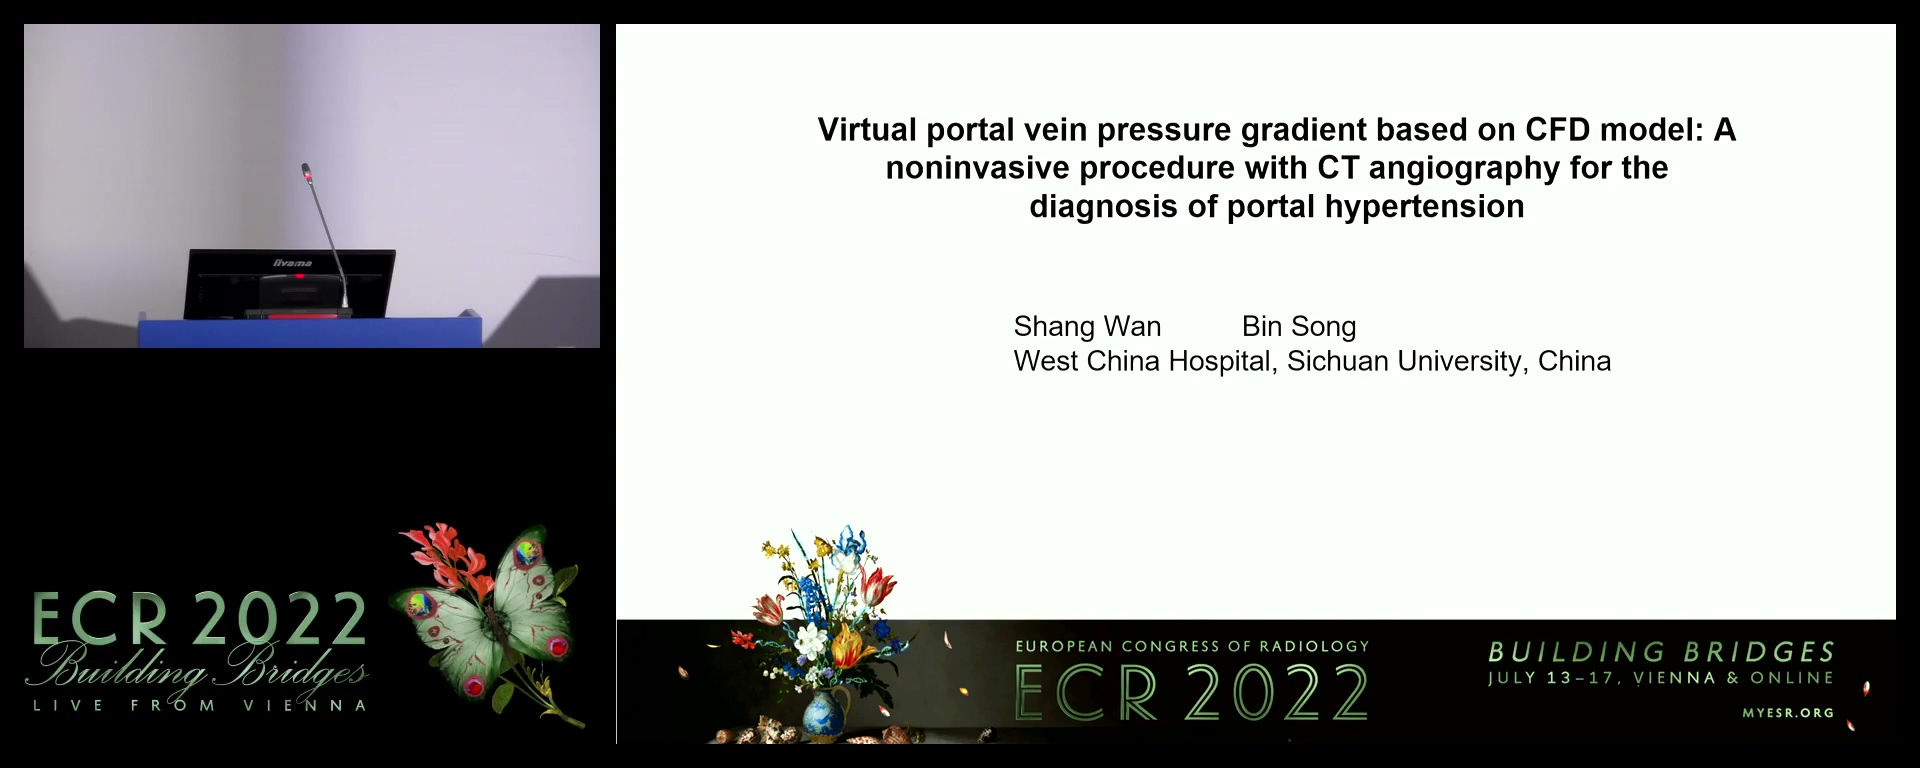 Virtual portal vein pressure gradient based on CFD model: a noninvasive procedure with CT angiography for the diagnosis of portal hypertension - Shang Wan, Cheng DU / CN